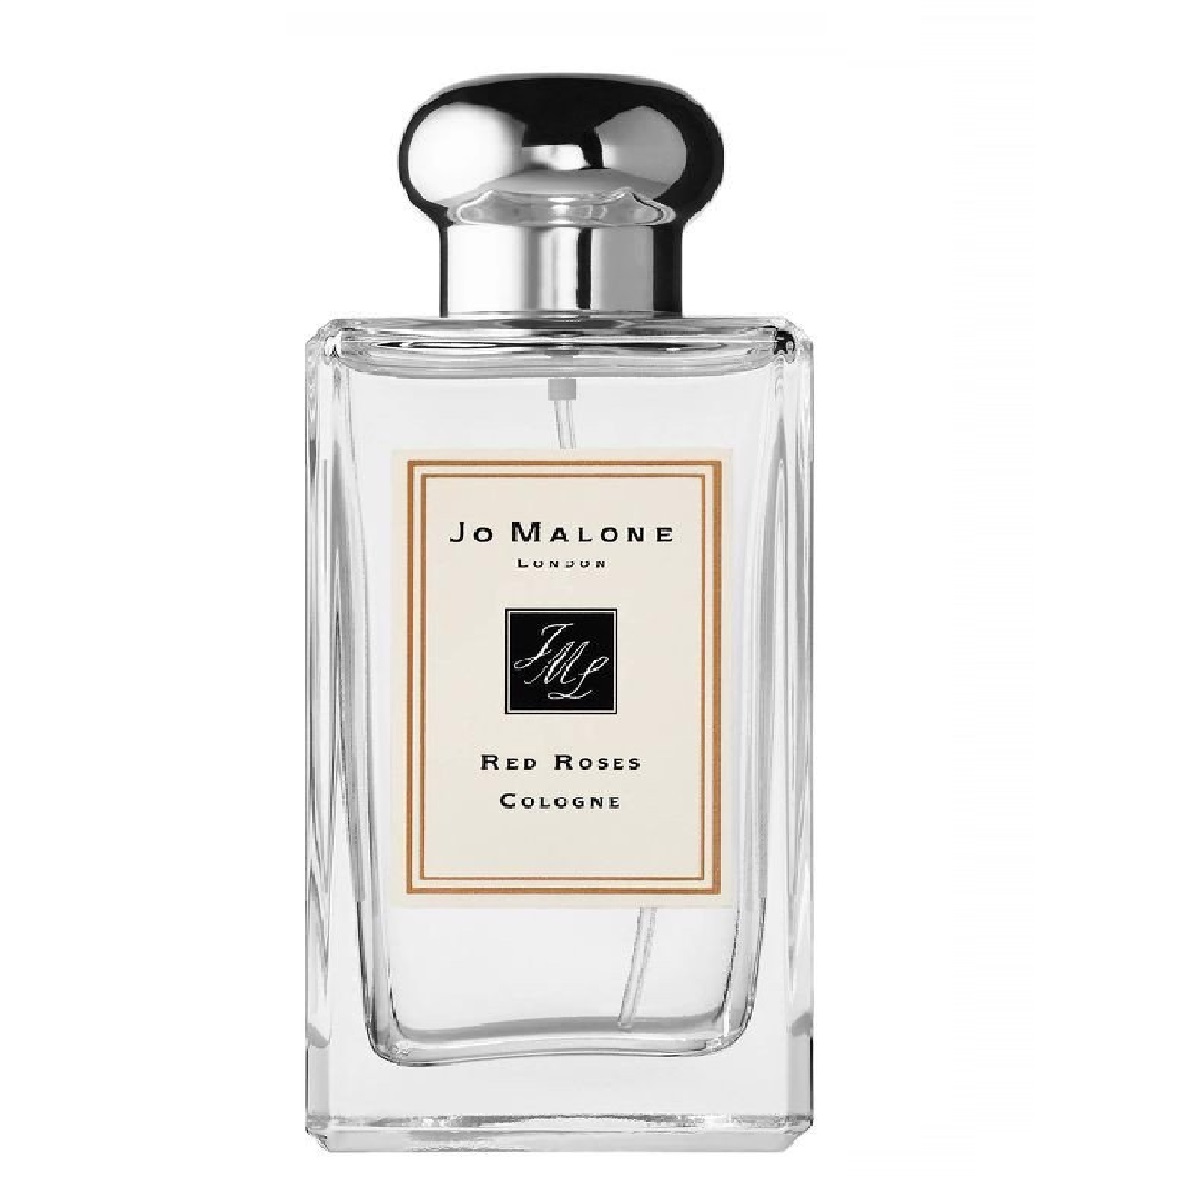 Jo Malone Red Roses Cologne